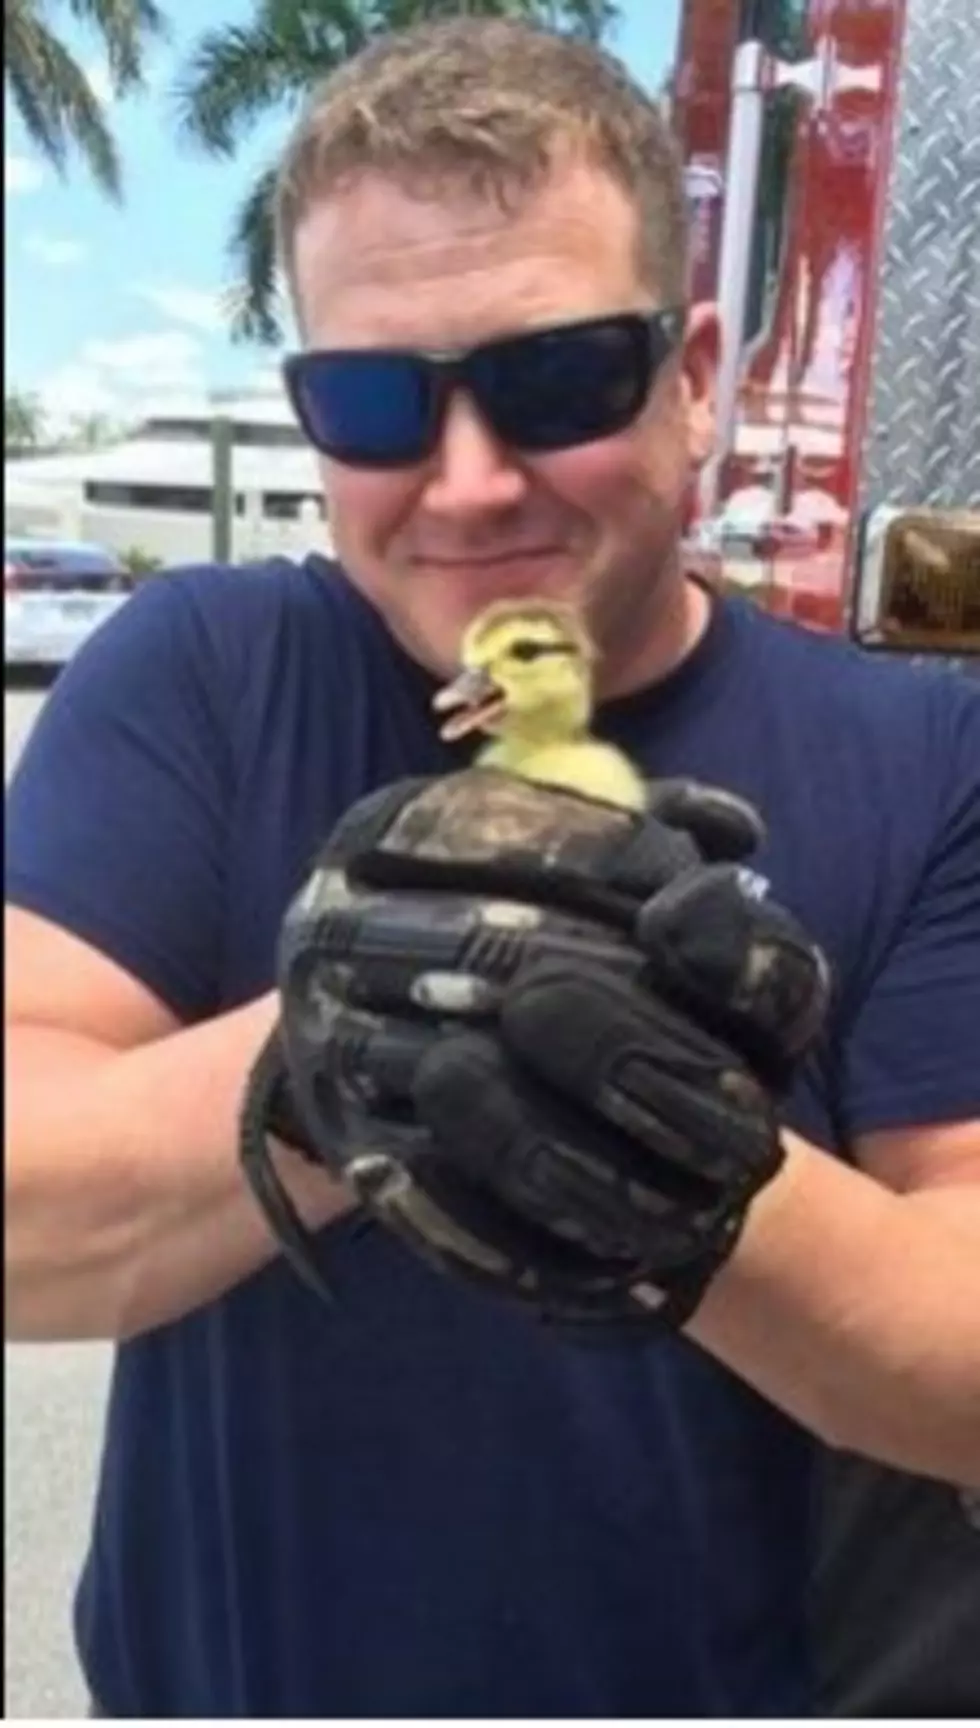 Cutest Rescue You Will See Today Courtesy of a Firefighter [PHOTO]